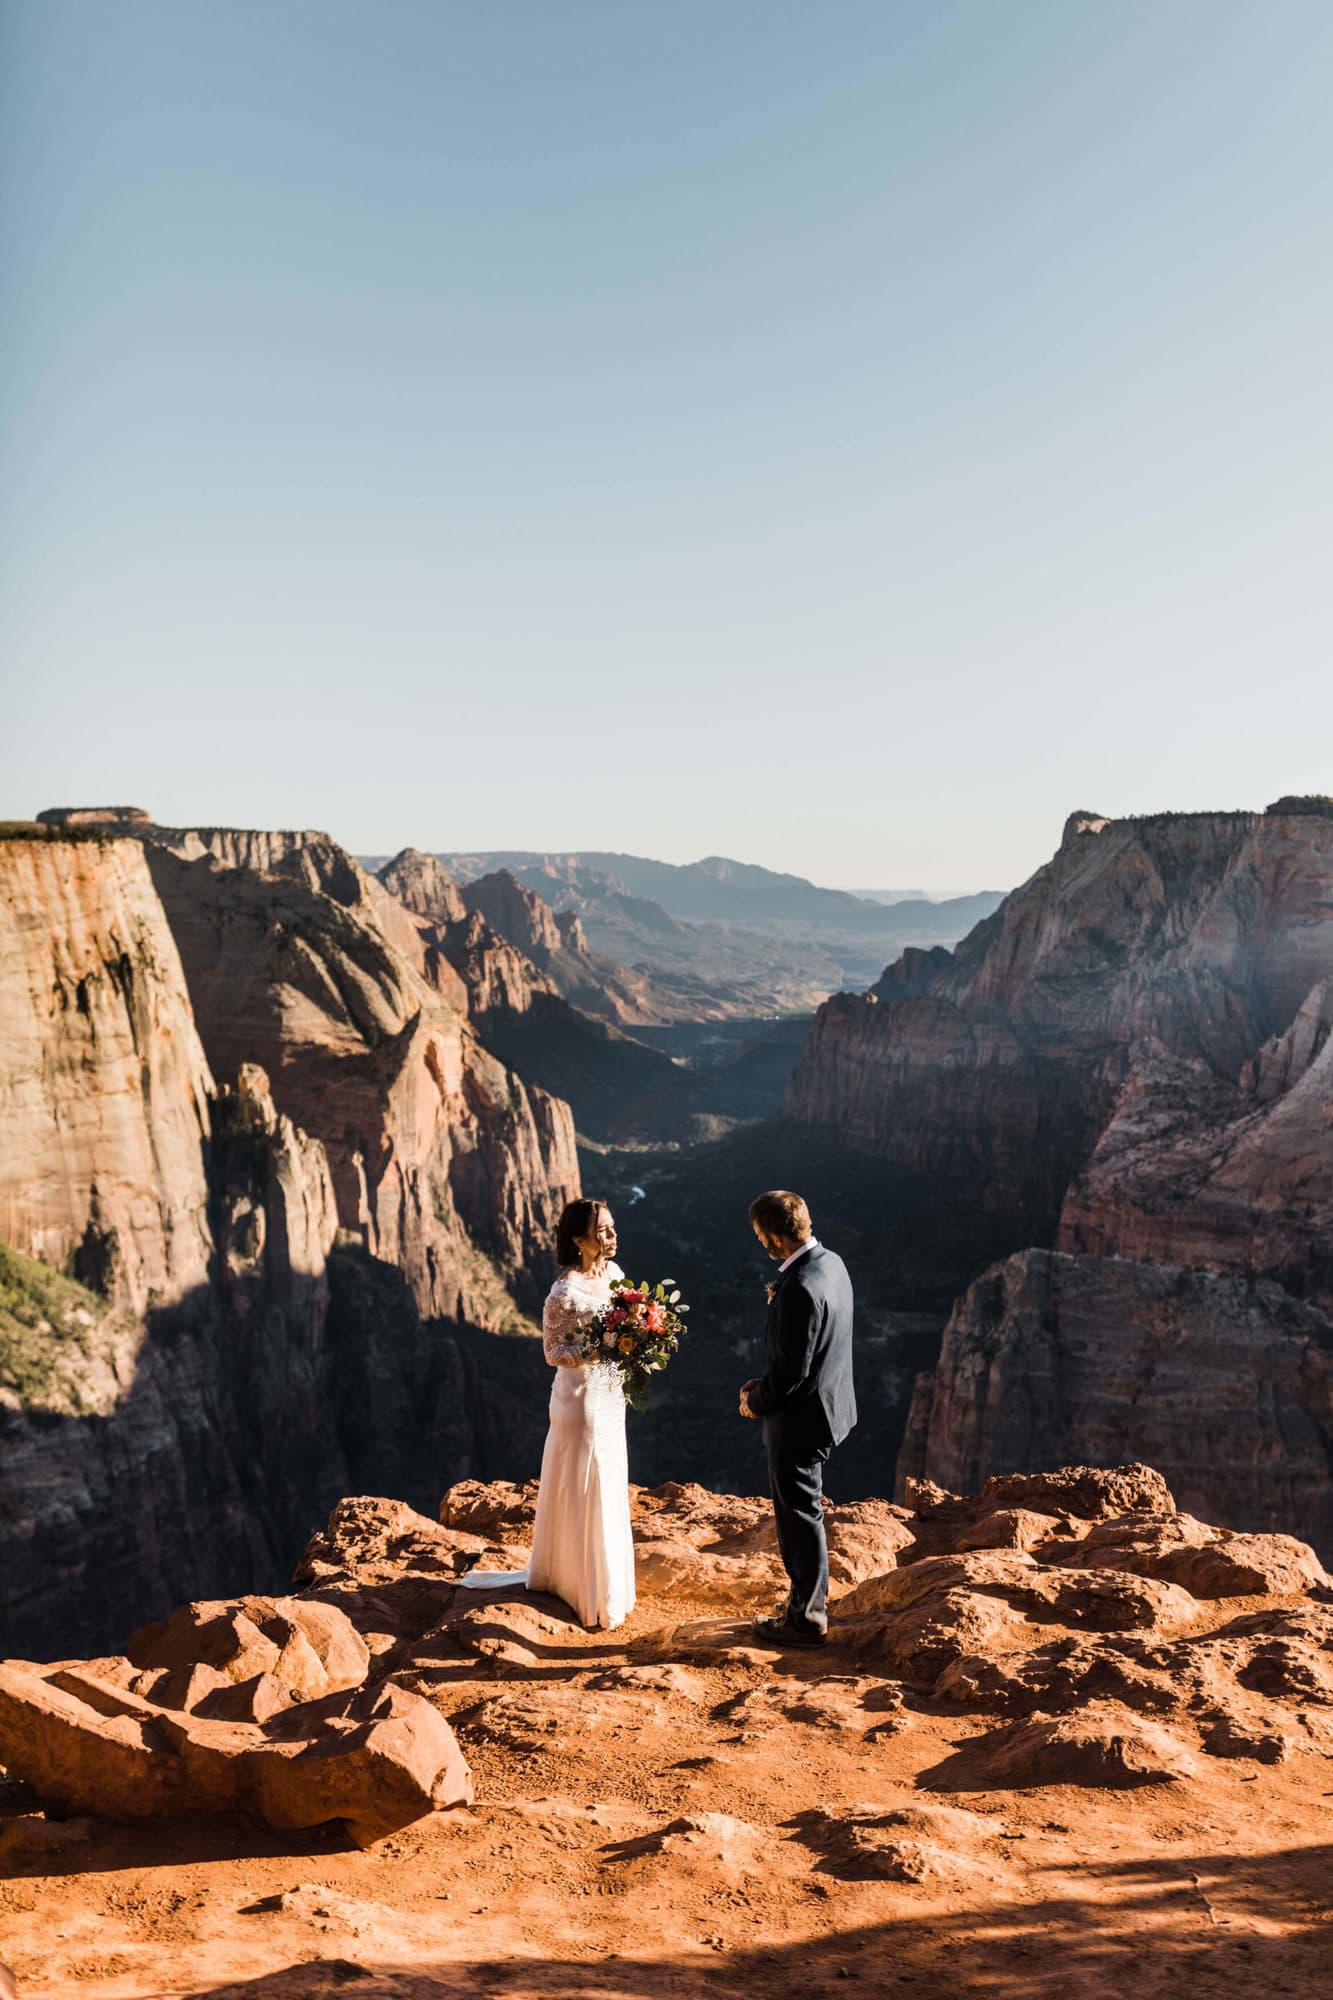 This Zion National Park elopement has it all; plot twists, off-roading, slot canyons, and an absolutely killer view. You don't want to miss it!